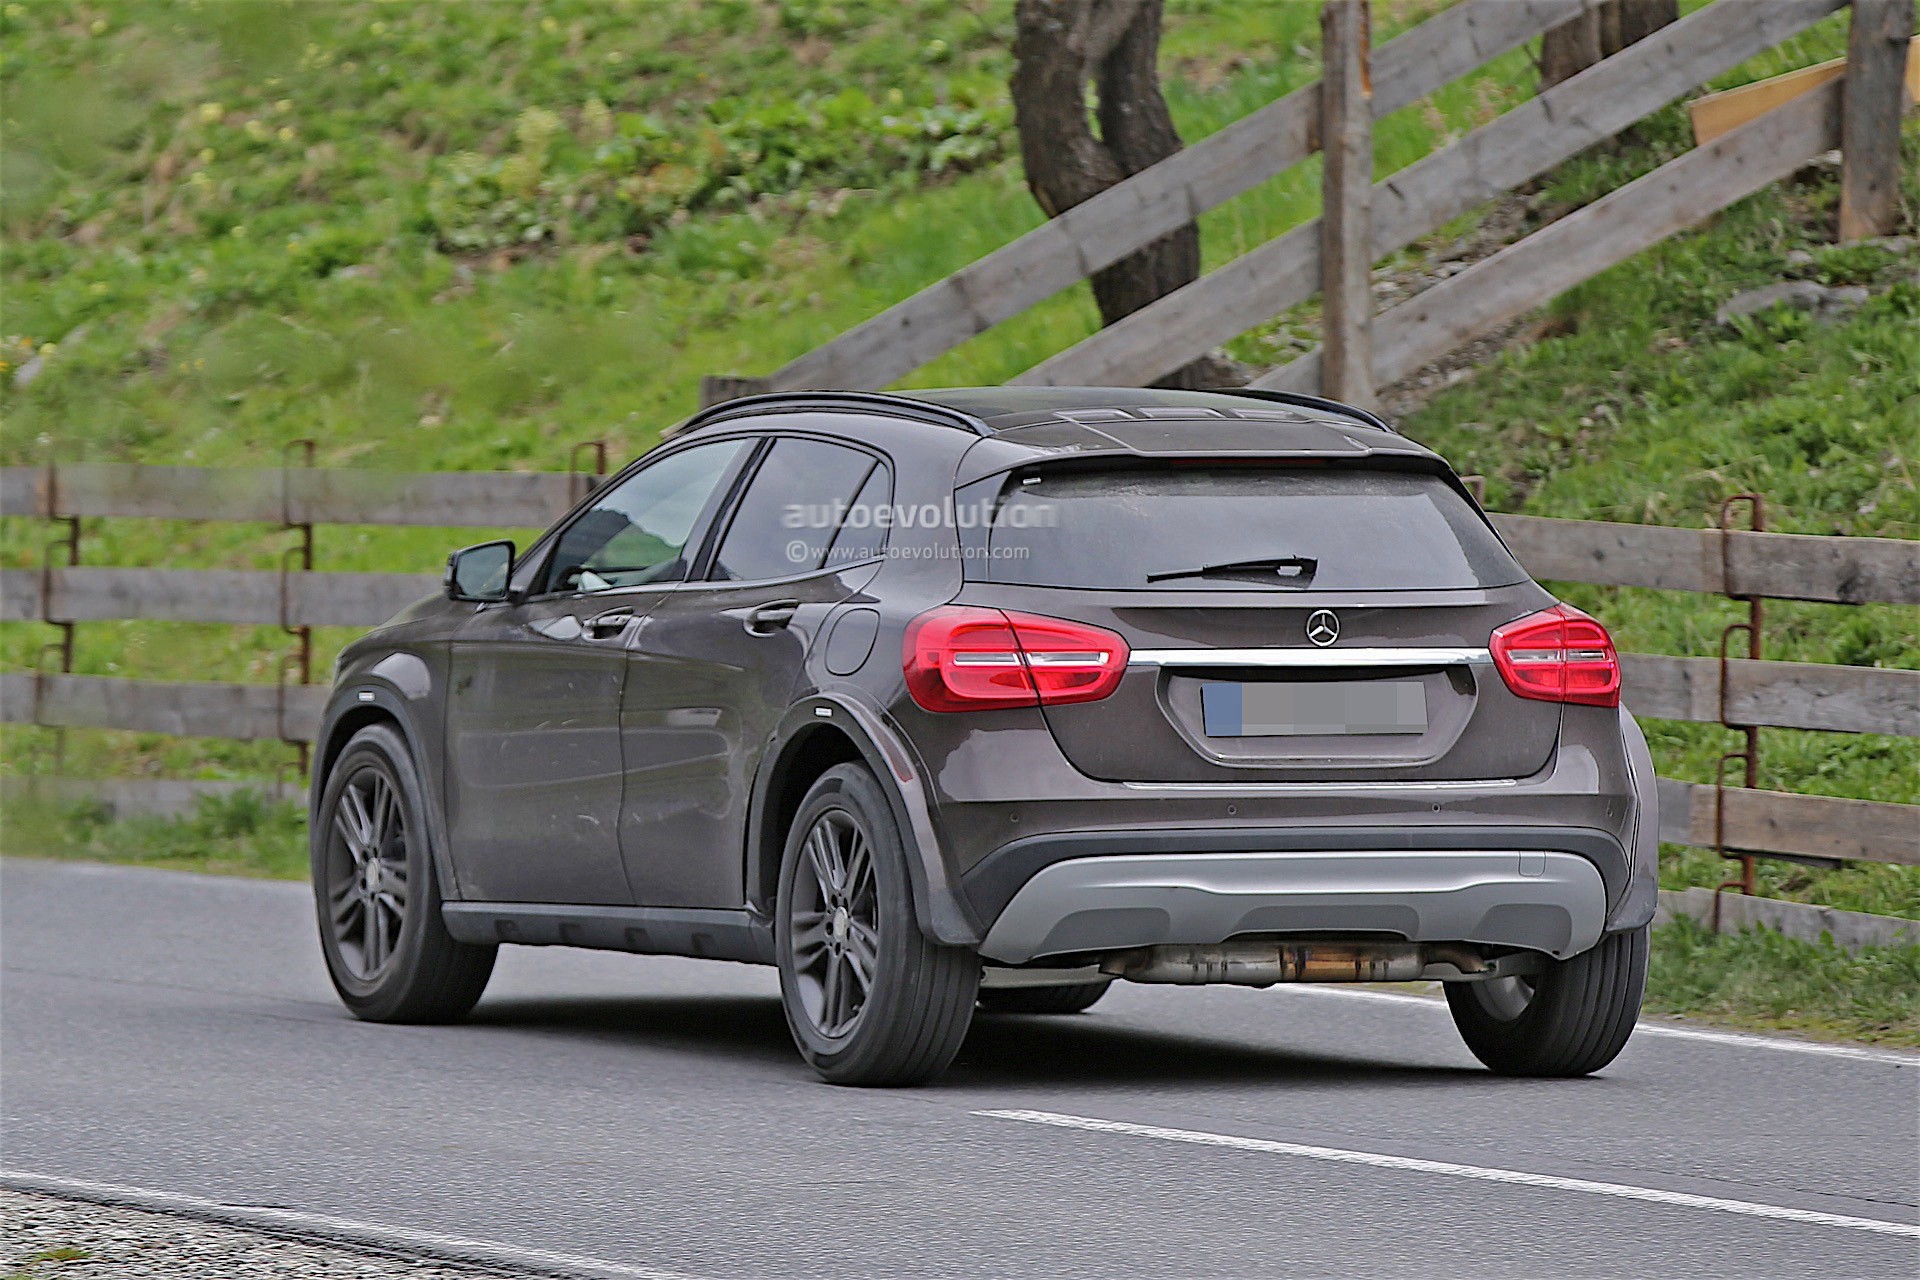 Mercedes-Benz Is Testing Upcoming GLB, Spyshots Reveal - autoevolution1920 x 1280